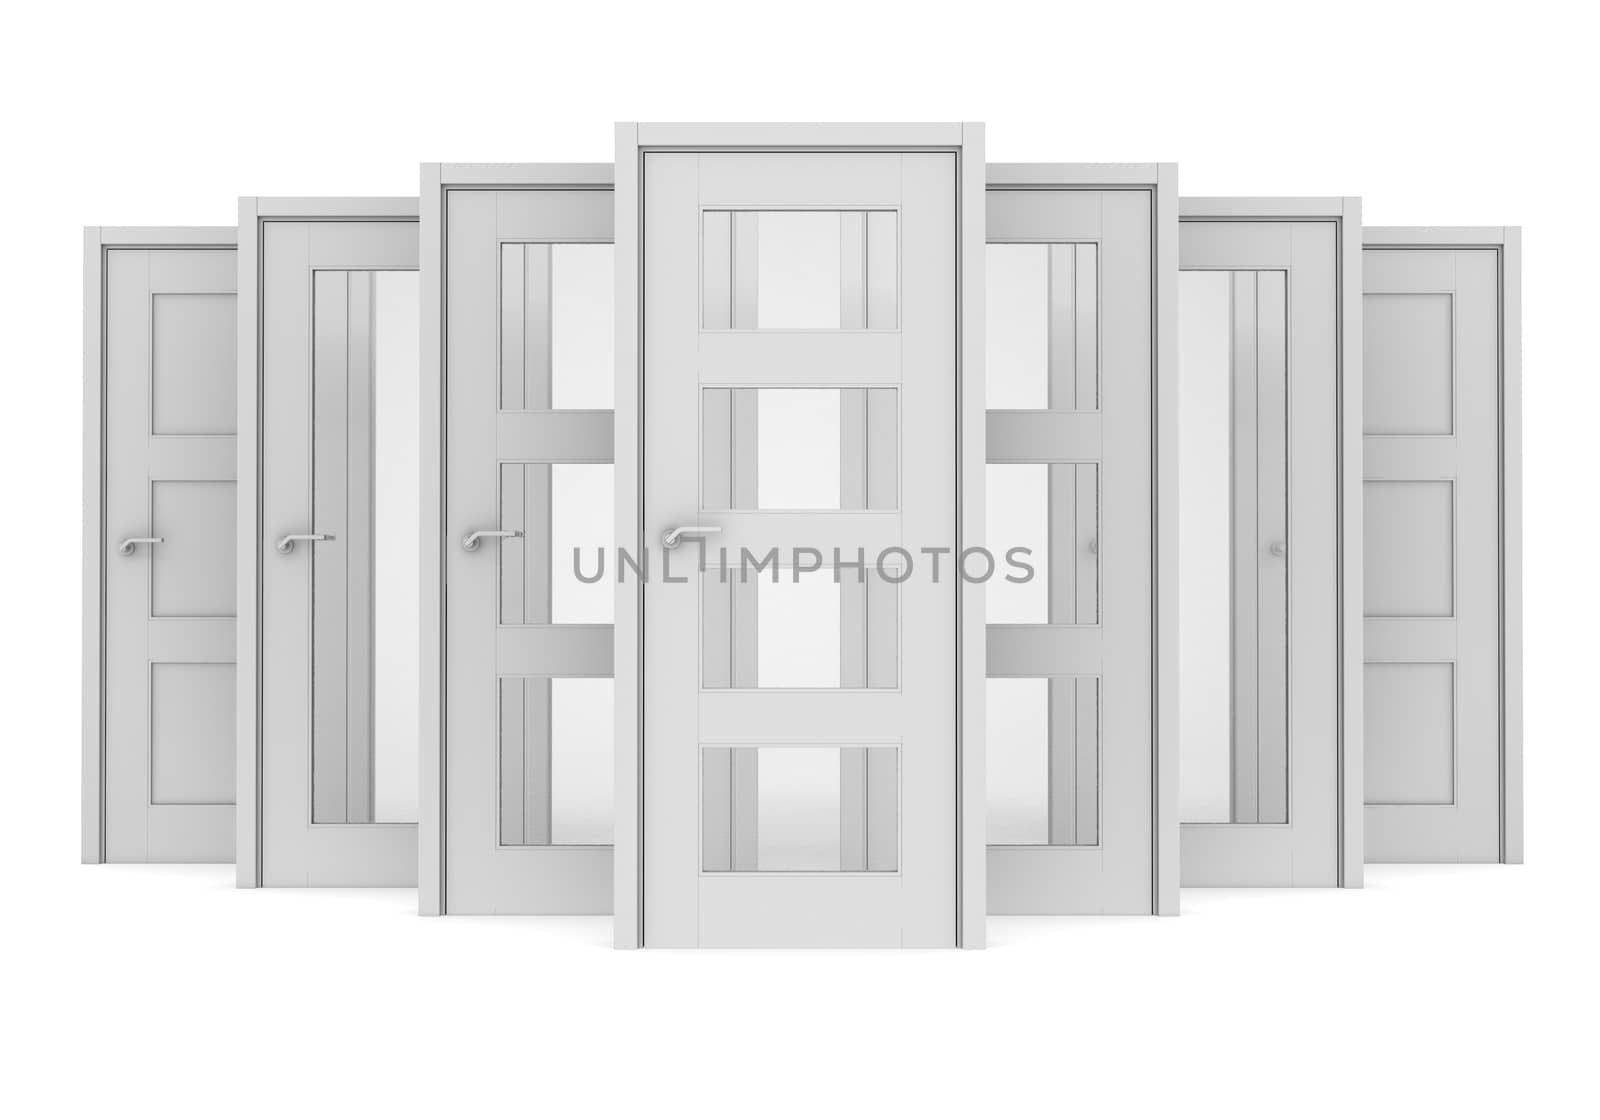 Group of white doors. Isolated render on a white background